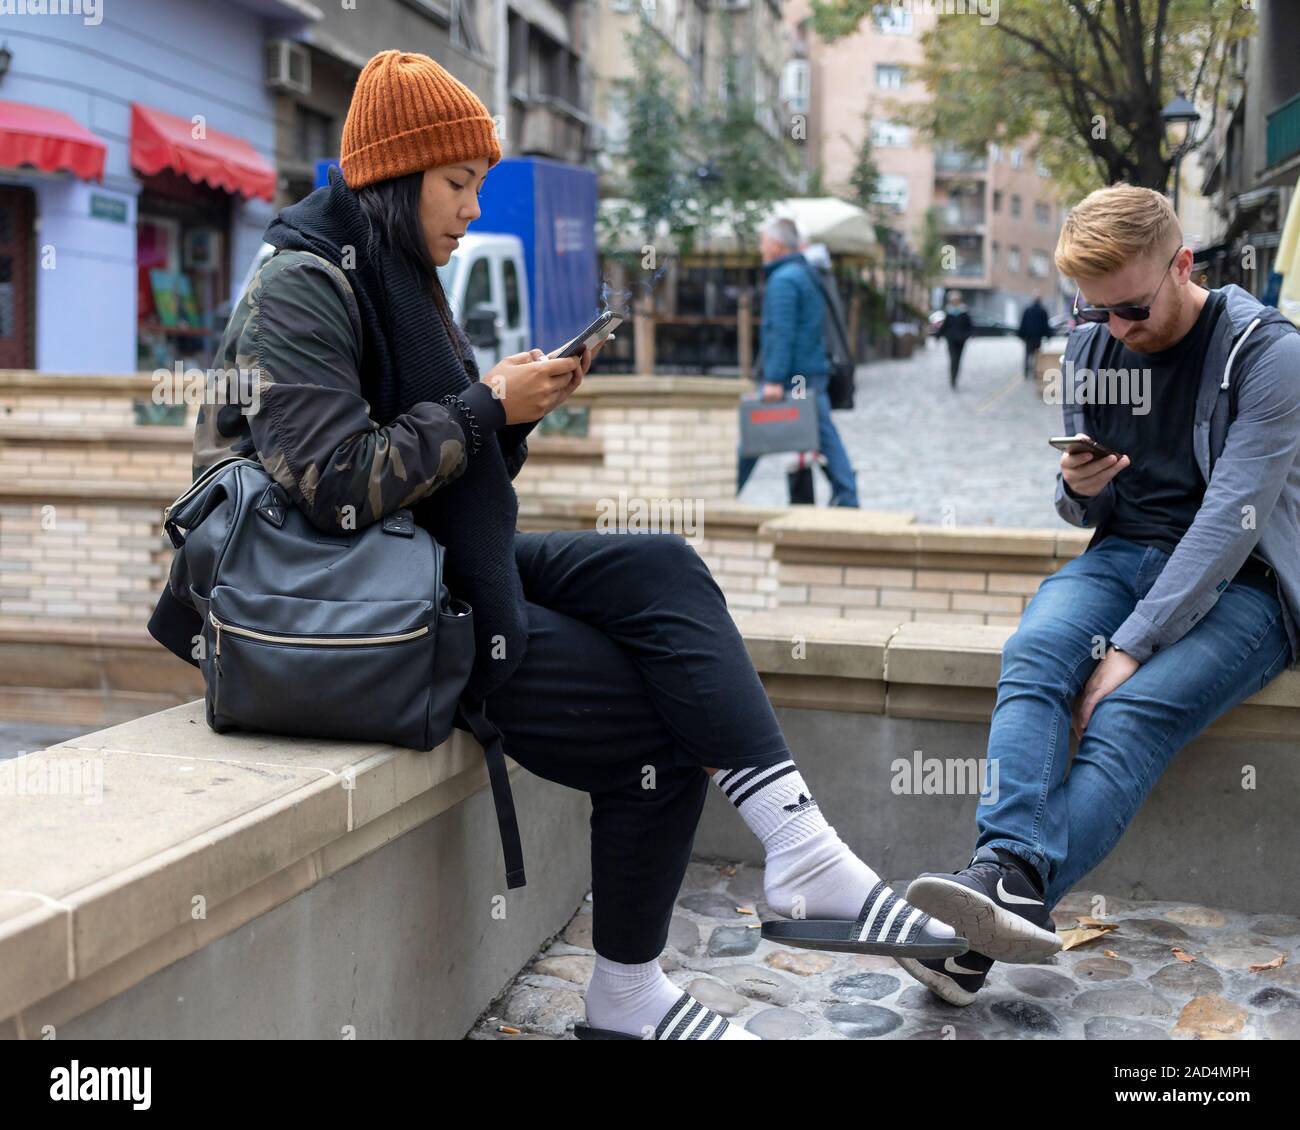 Belgrade, Serbia, Oct 7, 2019: A young couple sitting on the street focused into their smartphones Stock Photo